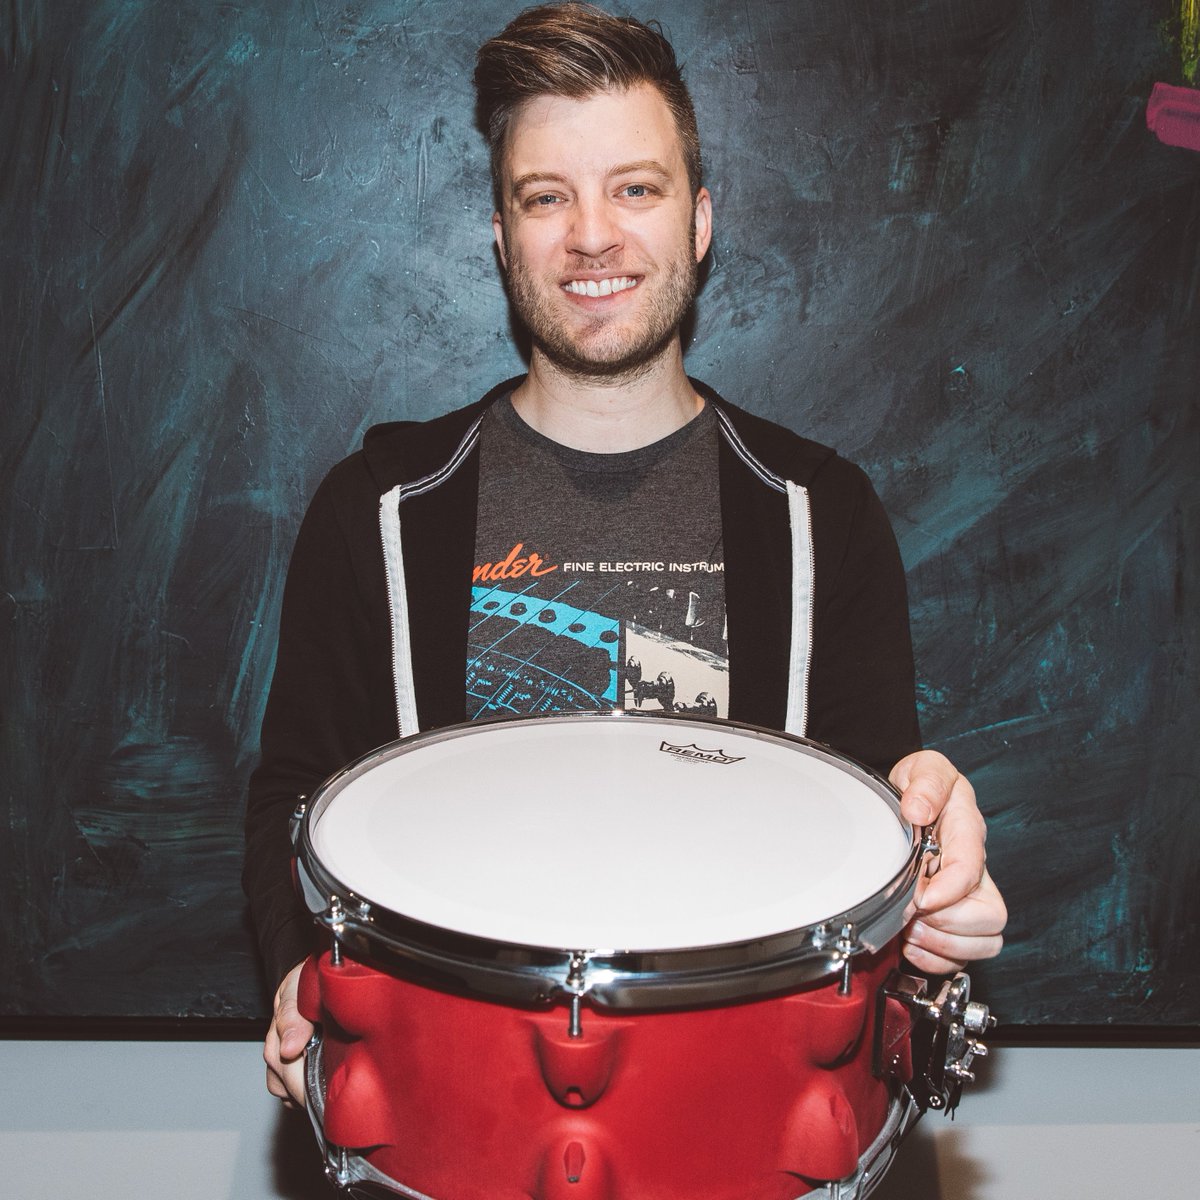 TOMORROW at 1PM ET: Hear from @danpawlovich on @DigitalTrends Live as he discusses the #3Dprinted snare drum he took on tour with Panic! At The Disco, and the additional drums he’s produced with Stratasys Direct. 
digitaltrends.com/live
PC: @JakeChams